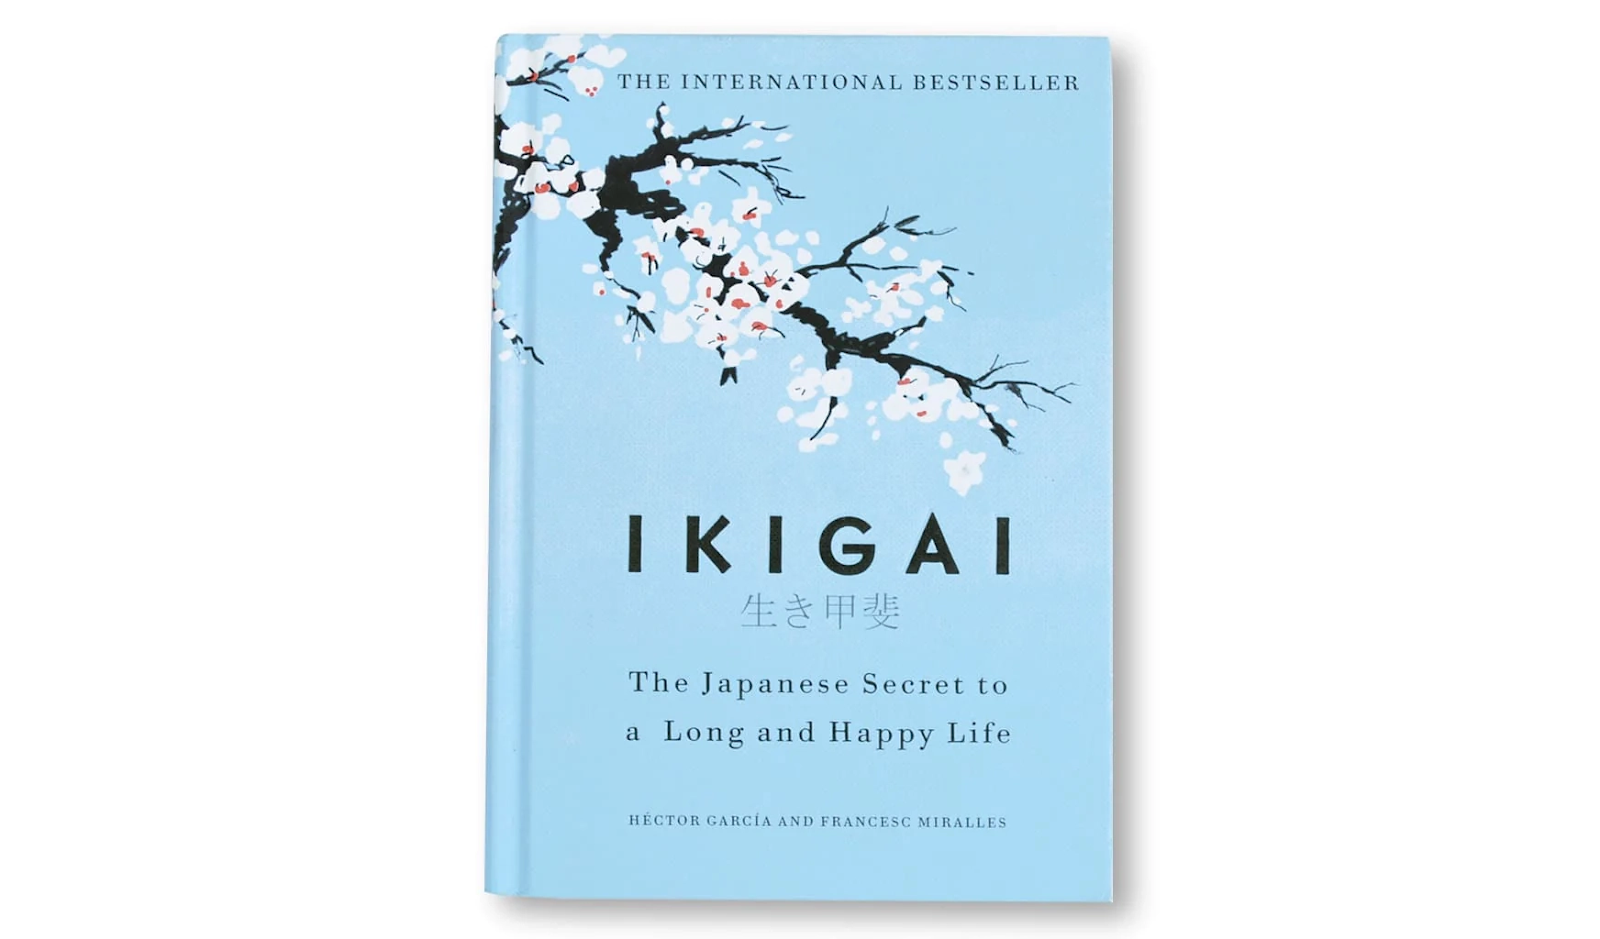 Ikigai - a book that helped me commit to remote marketing jobs